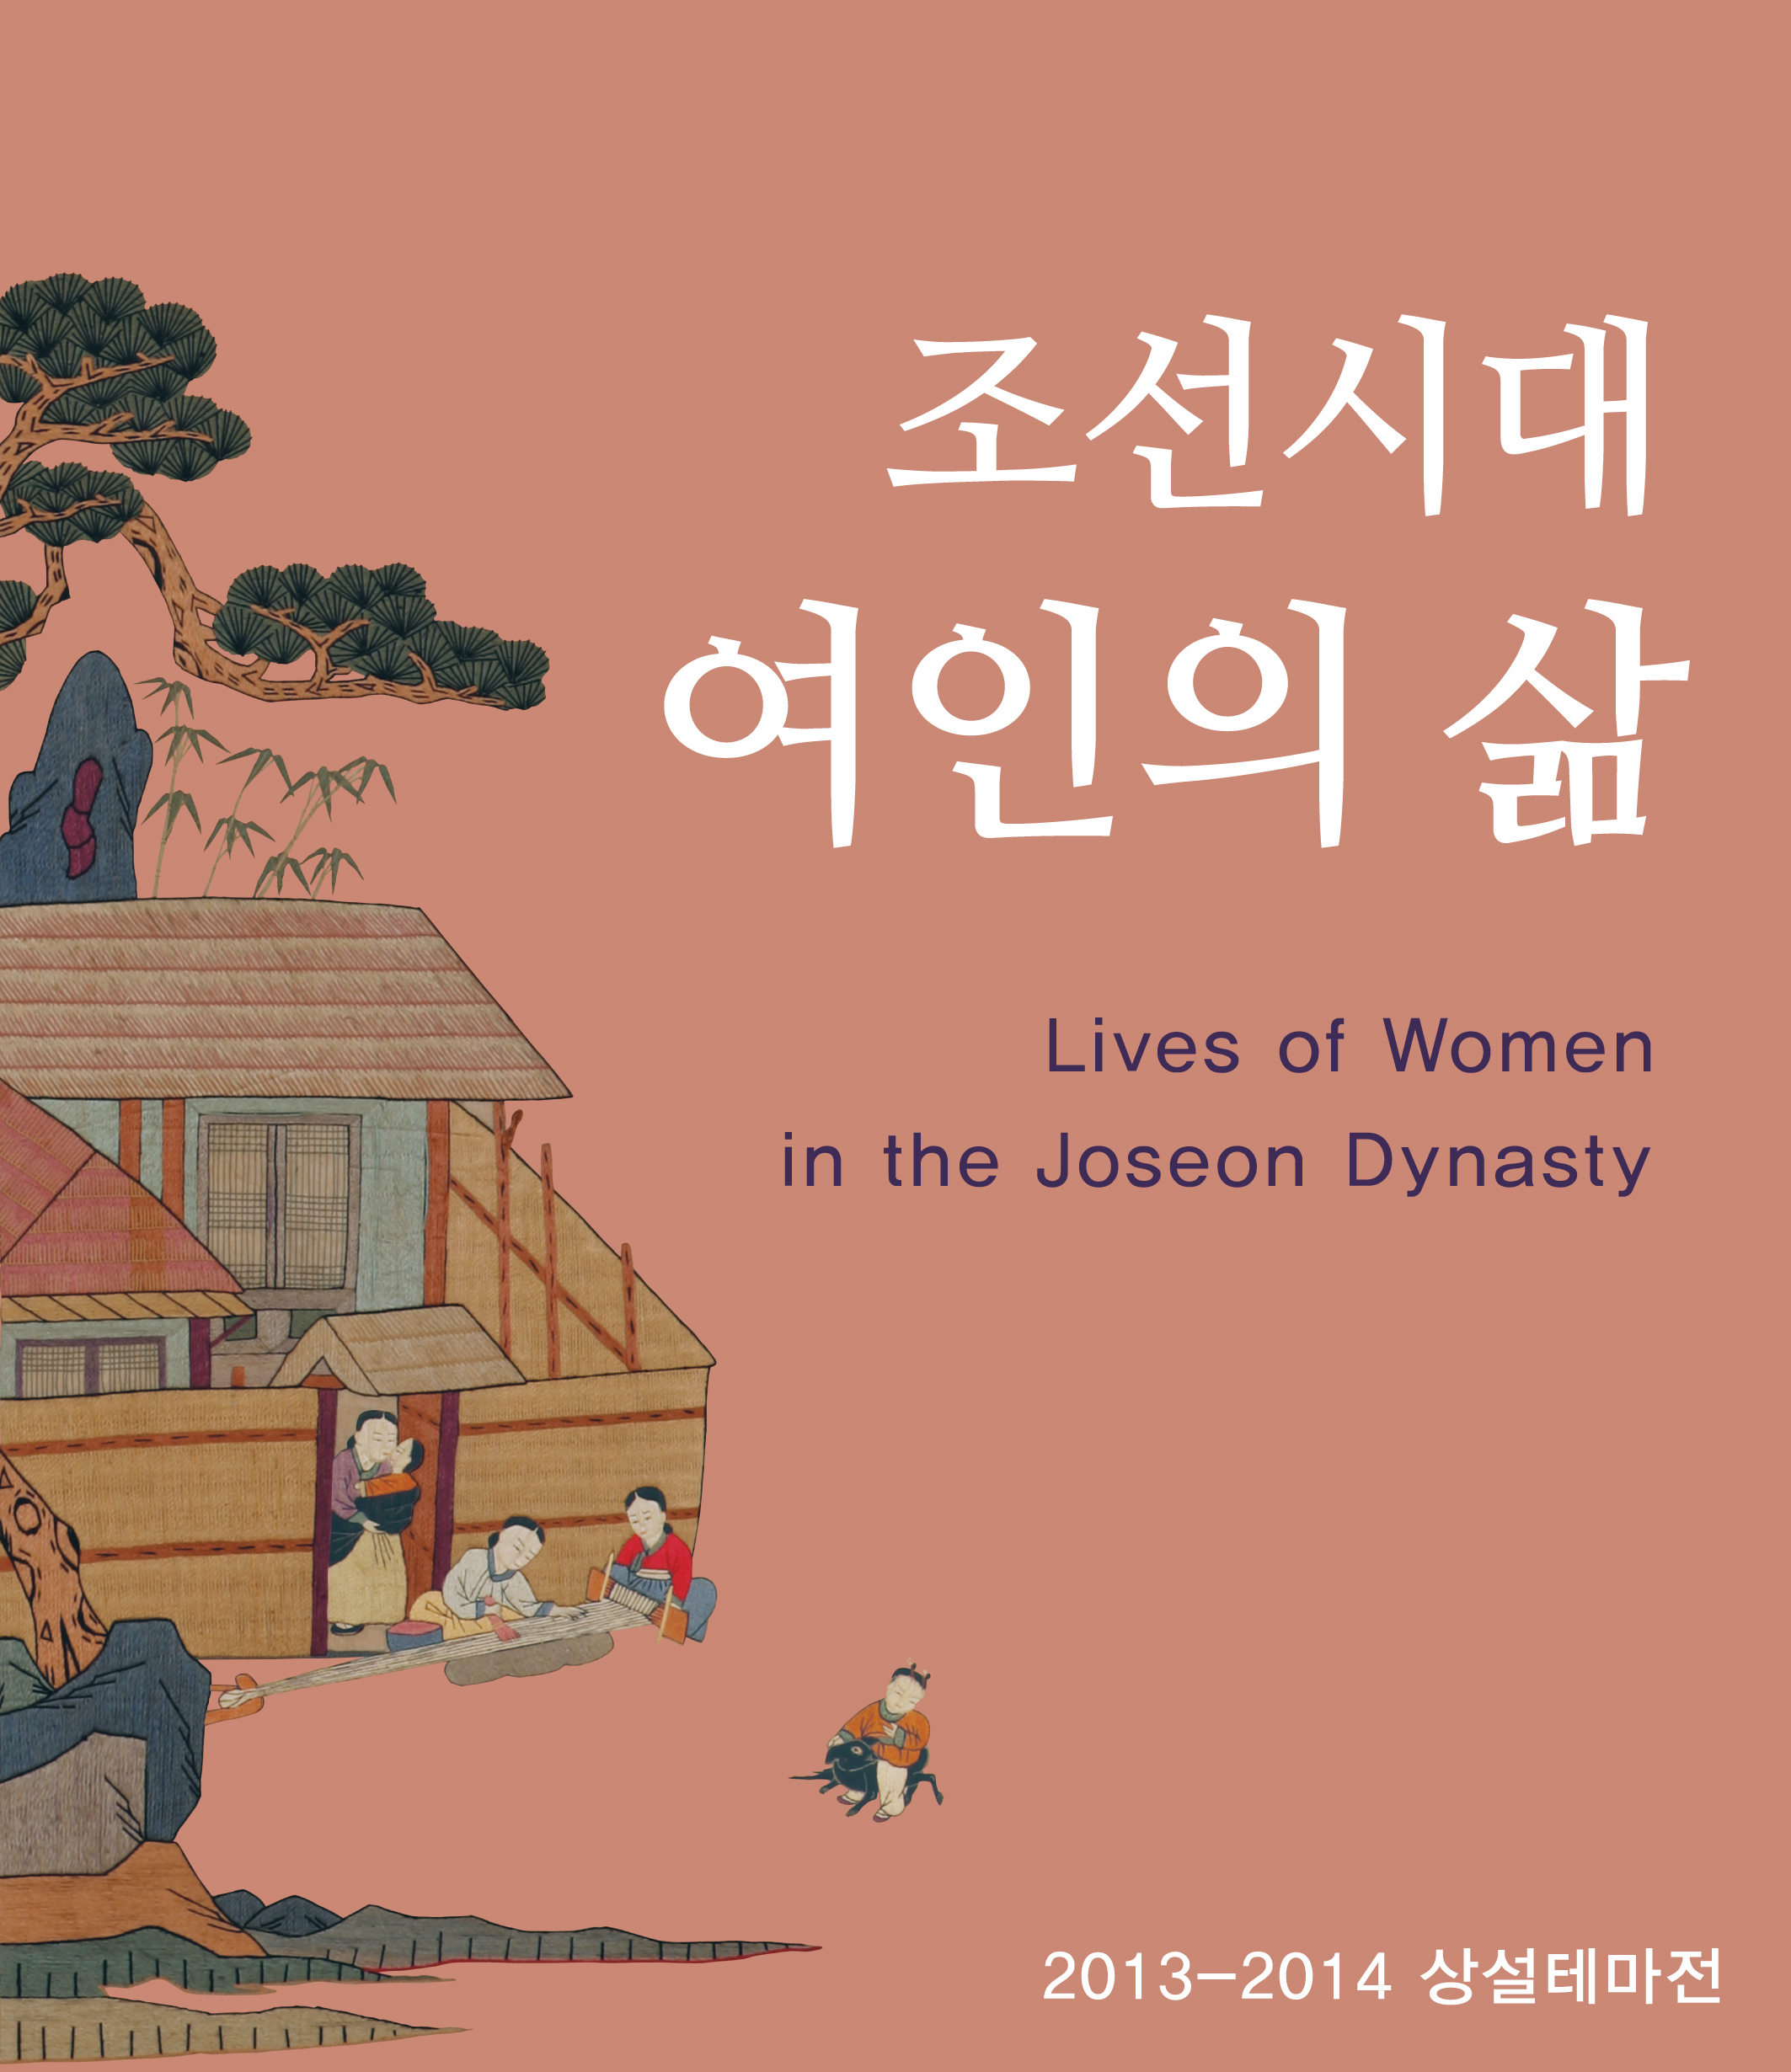 Life of Women in the Joseon Dynasty